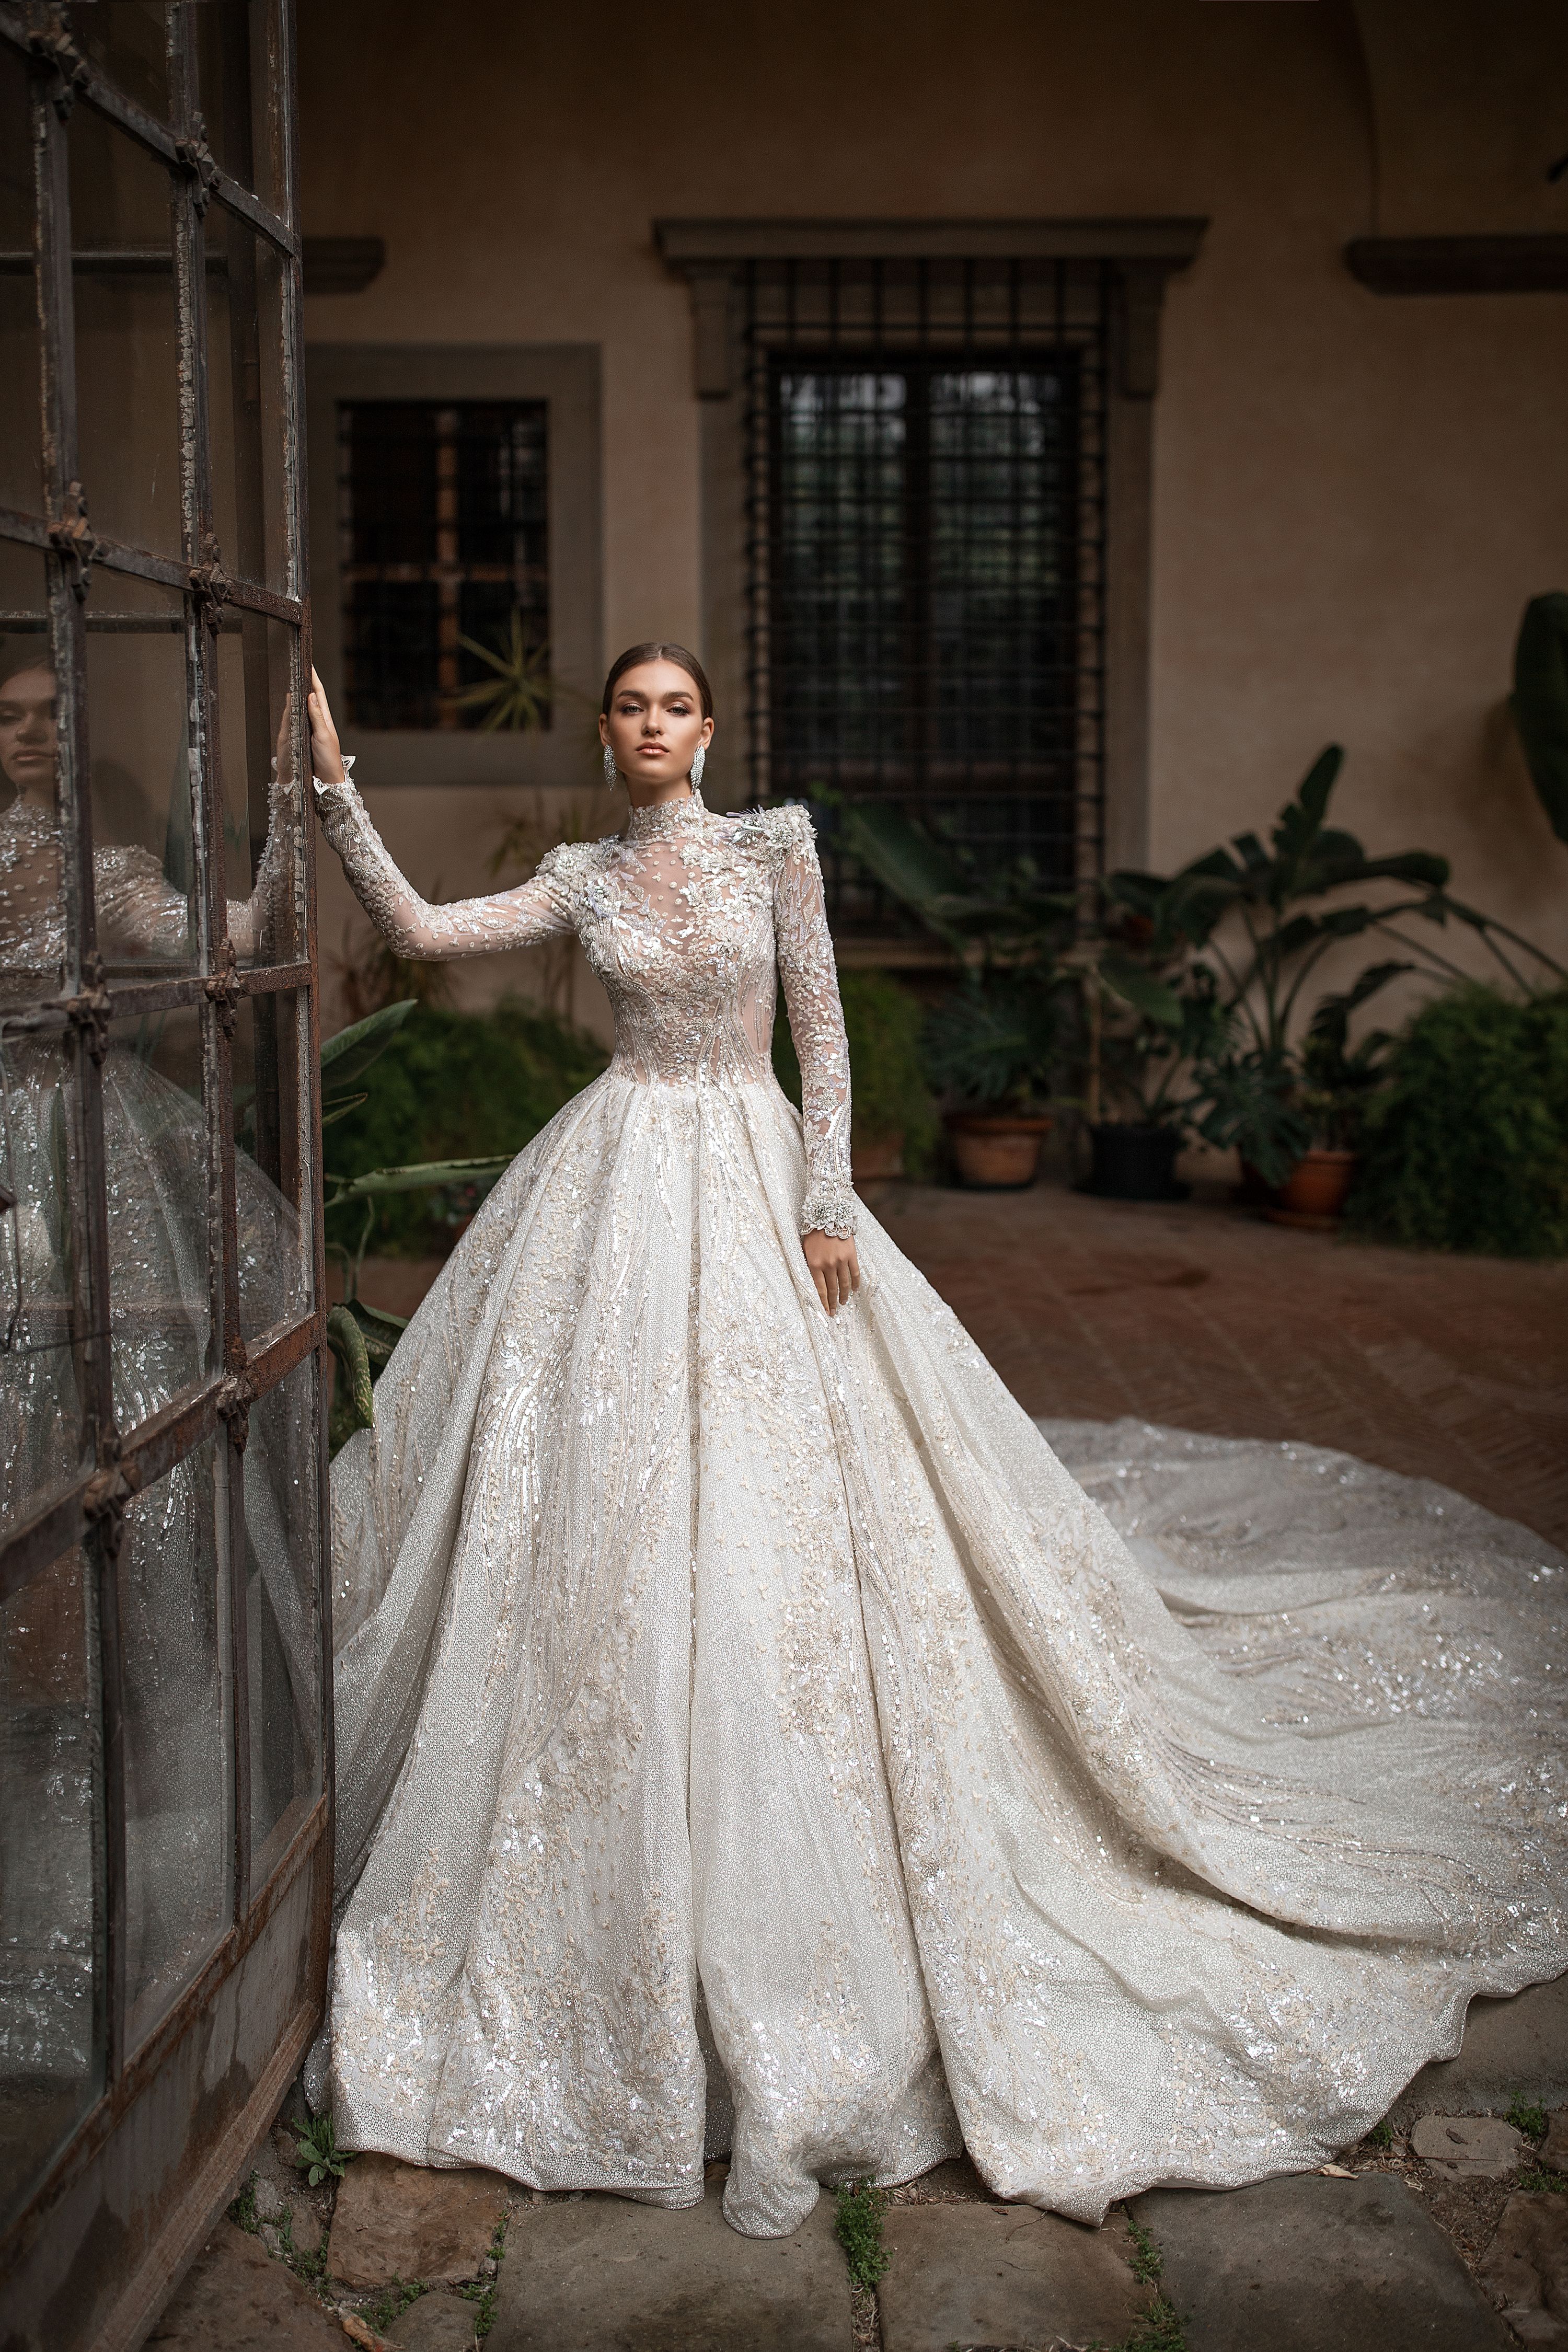 A Ukrainian bridal brand is making wedding gowns and army assault